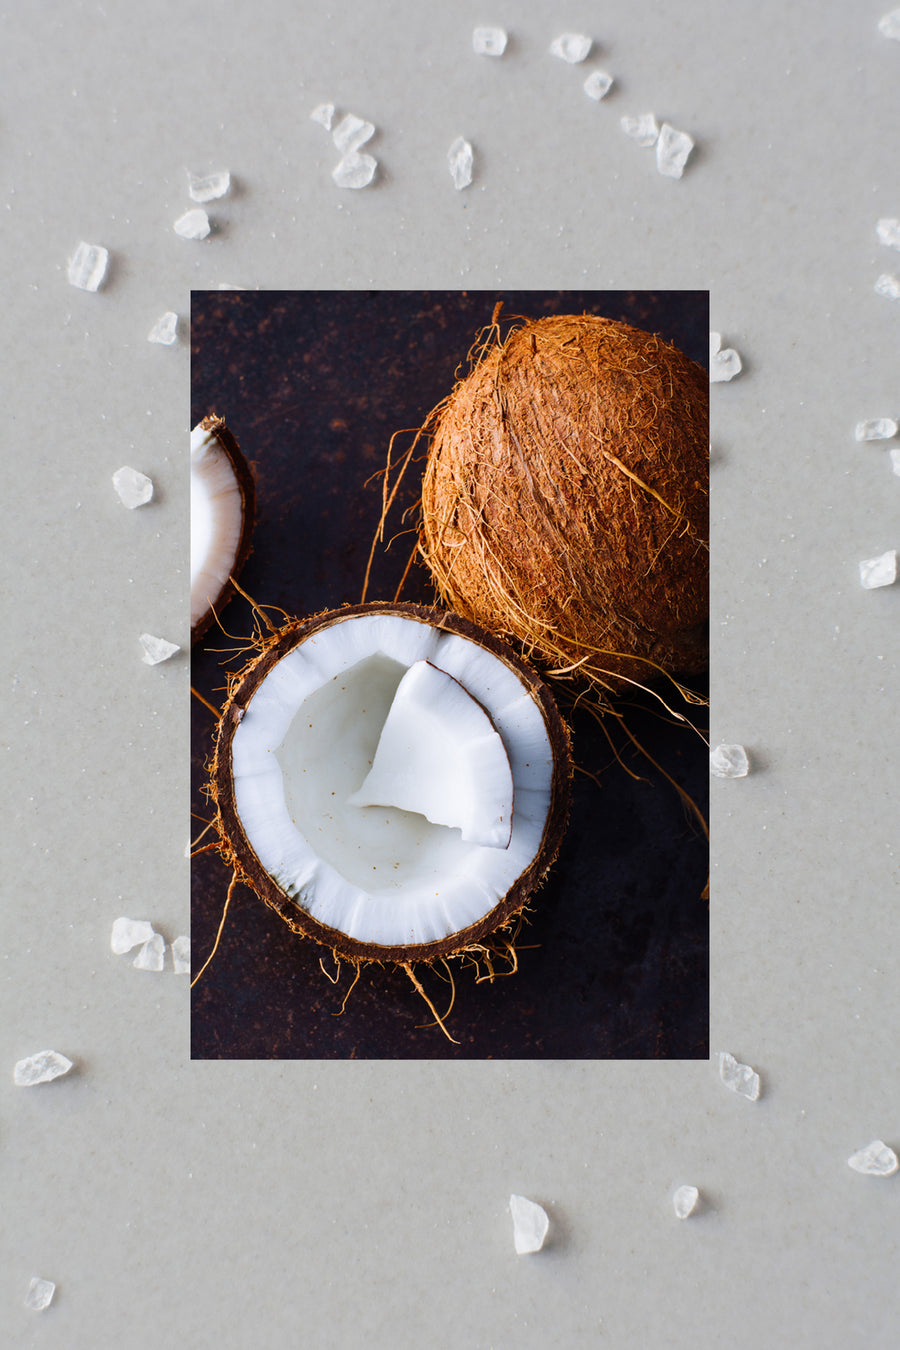 Half raw coconut next to whole coconut with large pieces of sea salt